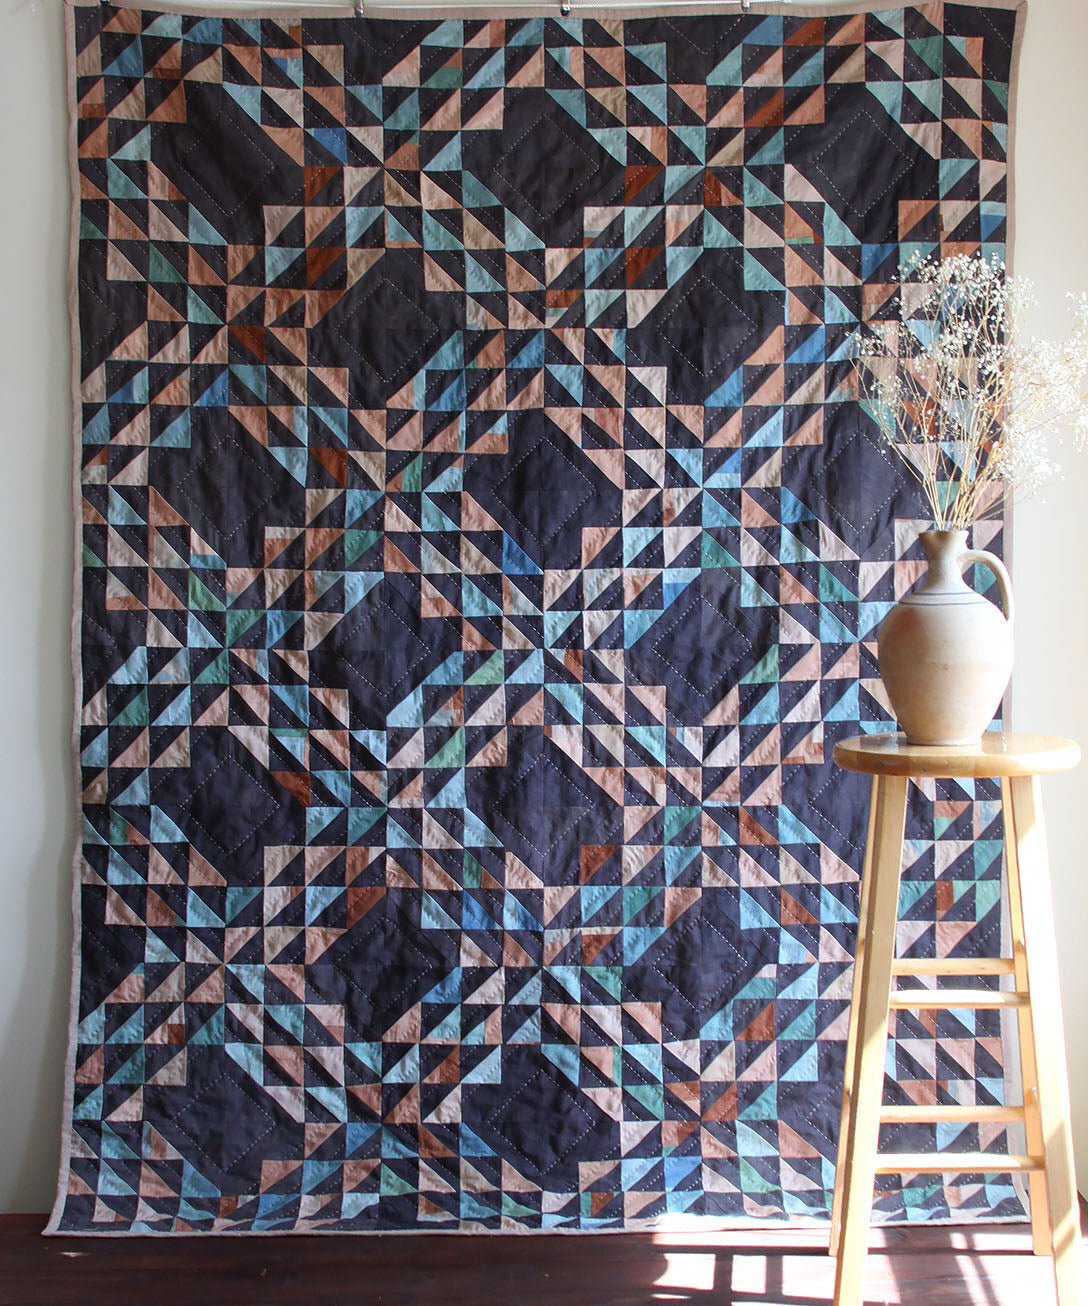 Ocean Waves Quilt (Currently on view at Verse Work/Shop)